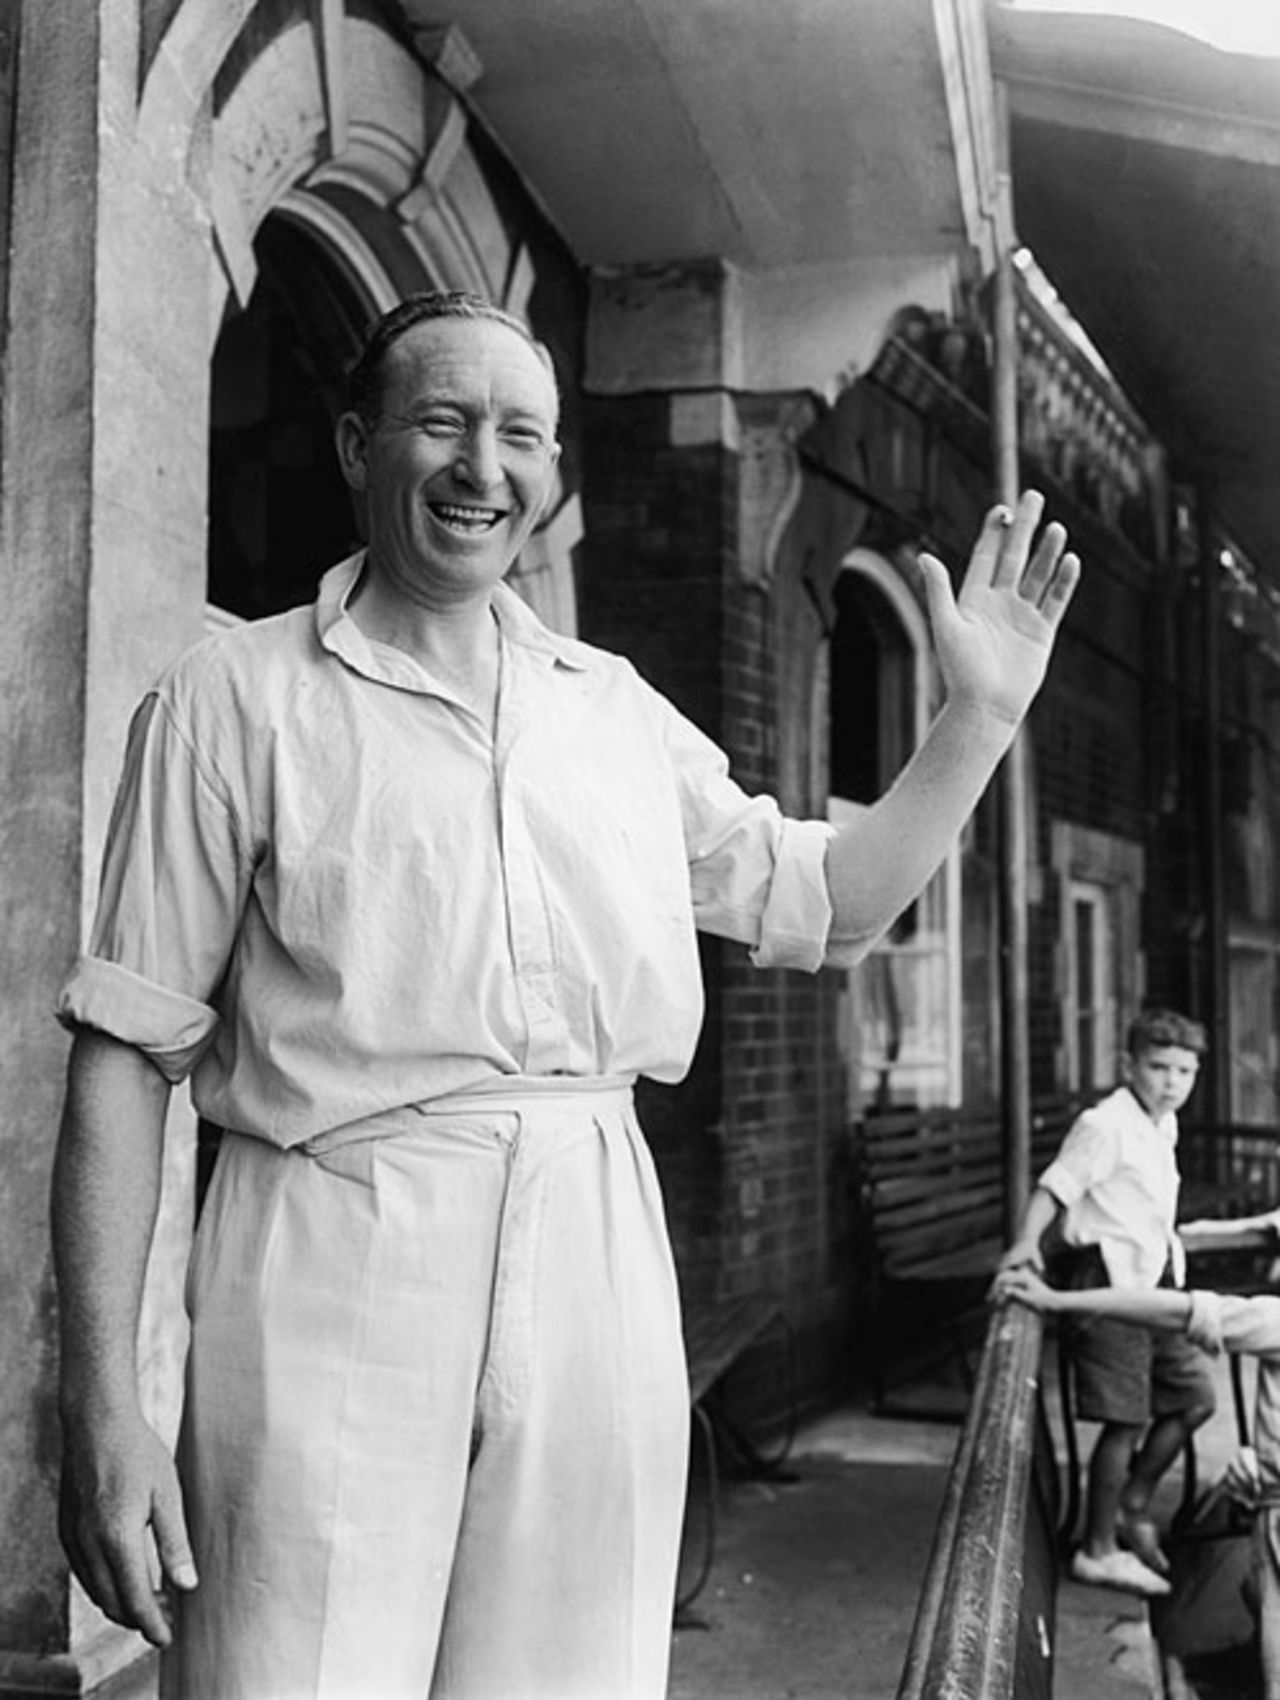 Surrey captain Stuart Surridge waves to the crowd after winning the County Championship for the fourth successive year, , Surrey v Sussex, The Oval, August 26, 1955